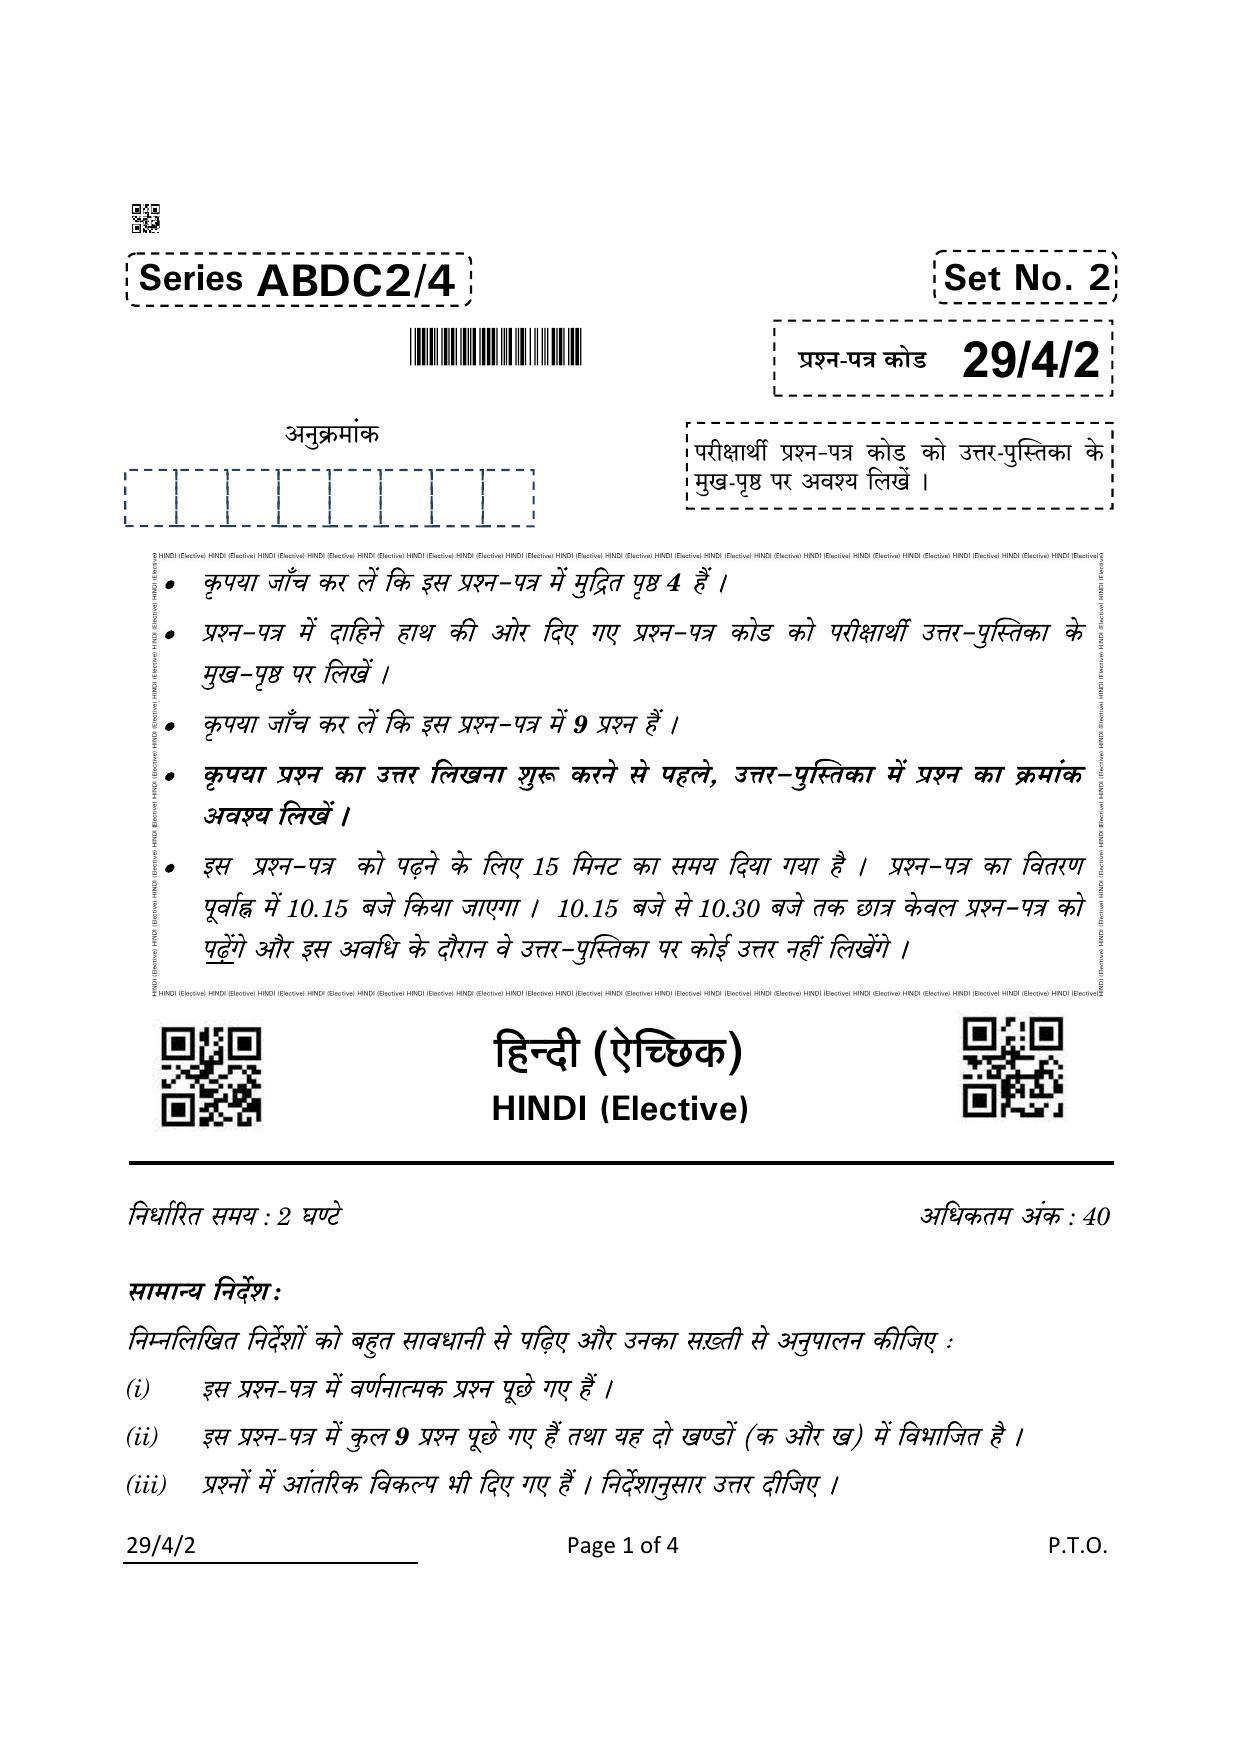 CBSE Class 12 29-4-2 Hindi Elective 2022 Question Paper - Page 1